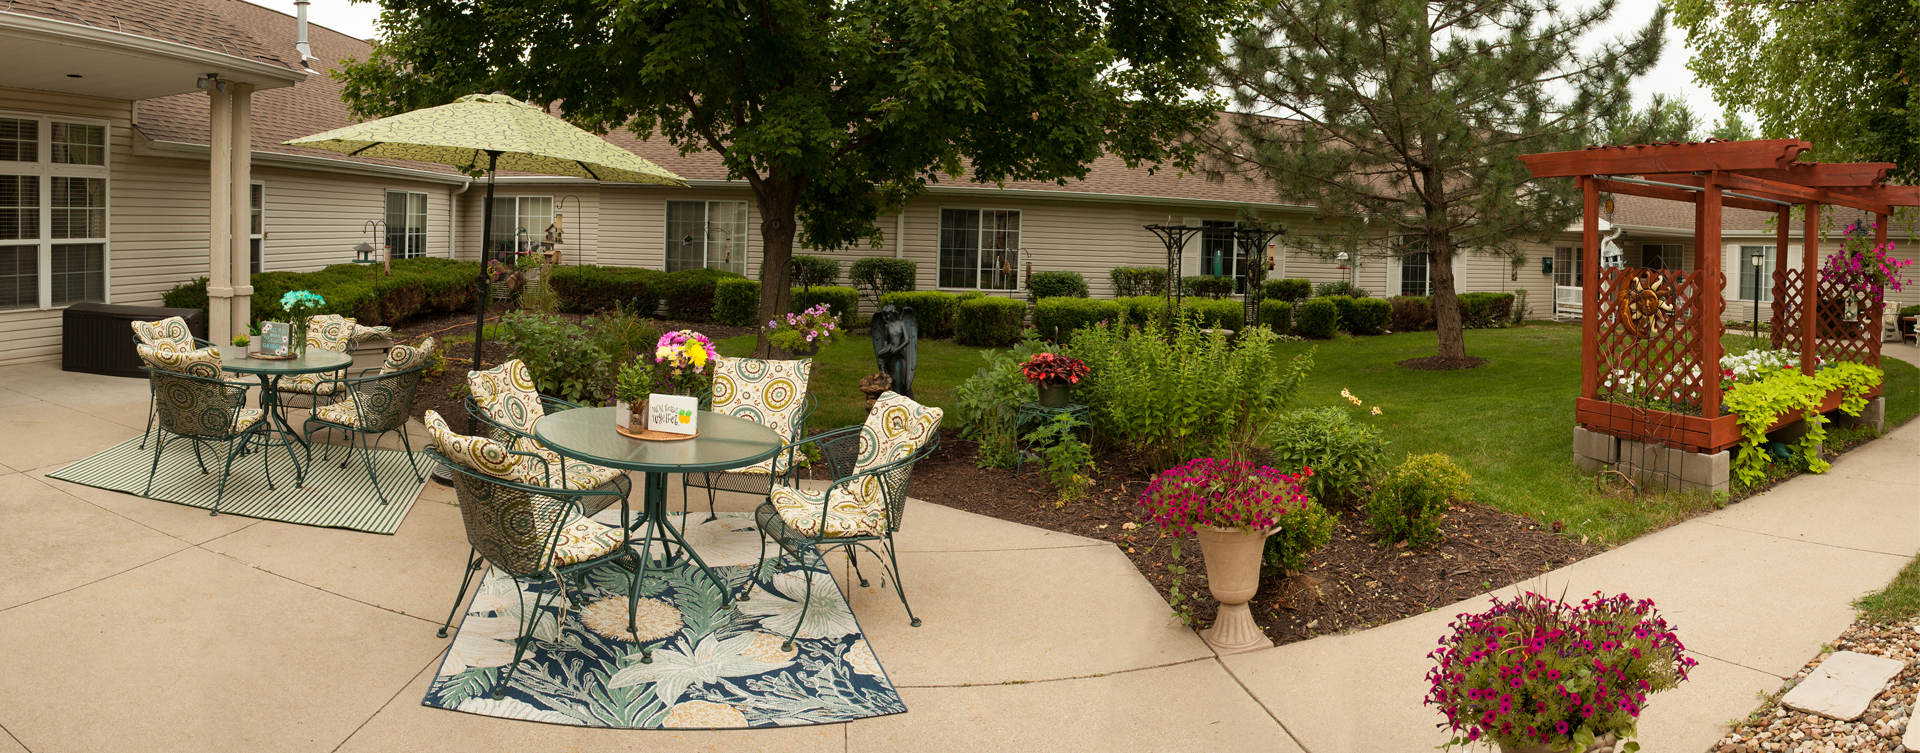 Enjoy bird watching, gardening and barbecuing in our courtyard at Bickford of Cedar Falls